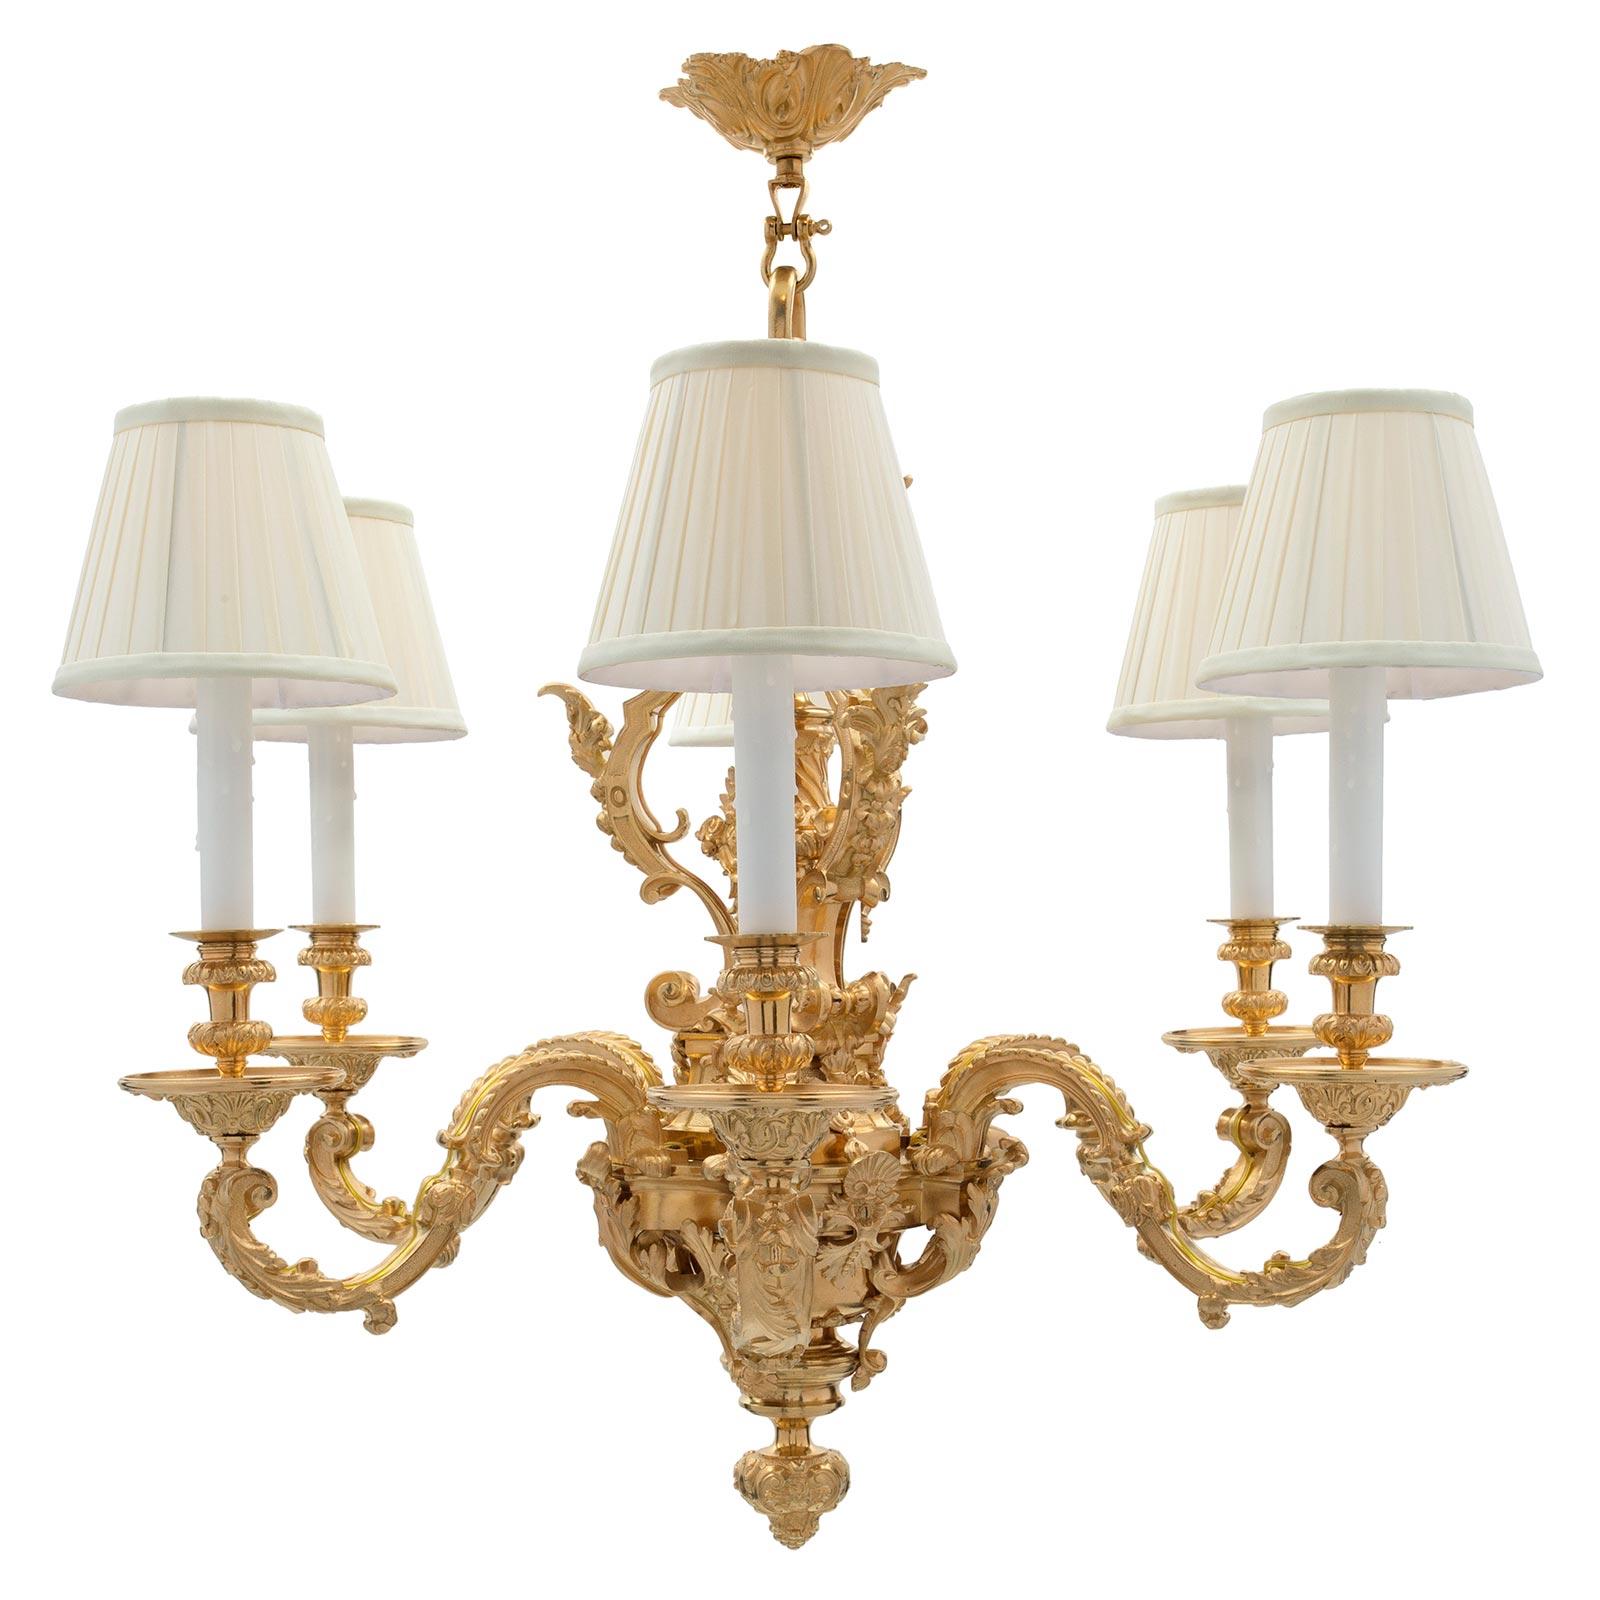 A most handsome French 19th century Renaissance st. ormolu six light chandelier. The chandelier is centered by a finely chased and etched foliate finial below an elaborate and most decorative pierced and scrolled design with large foliate movements.